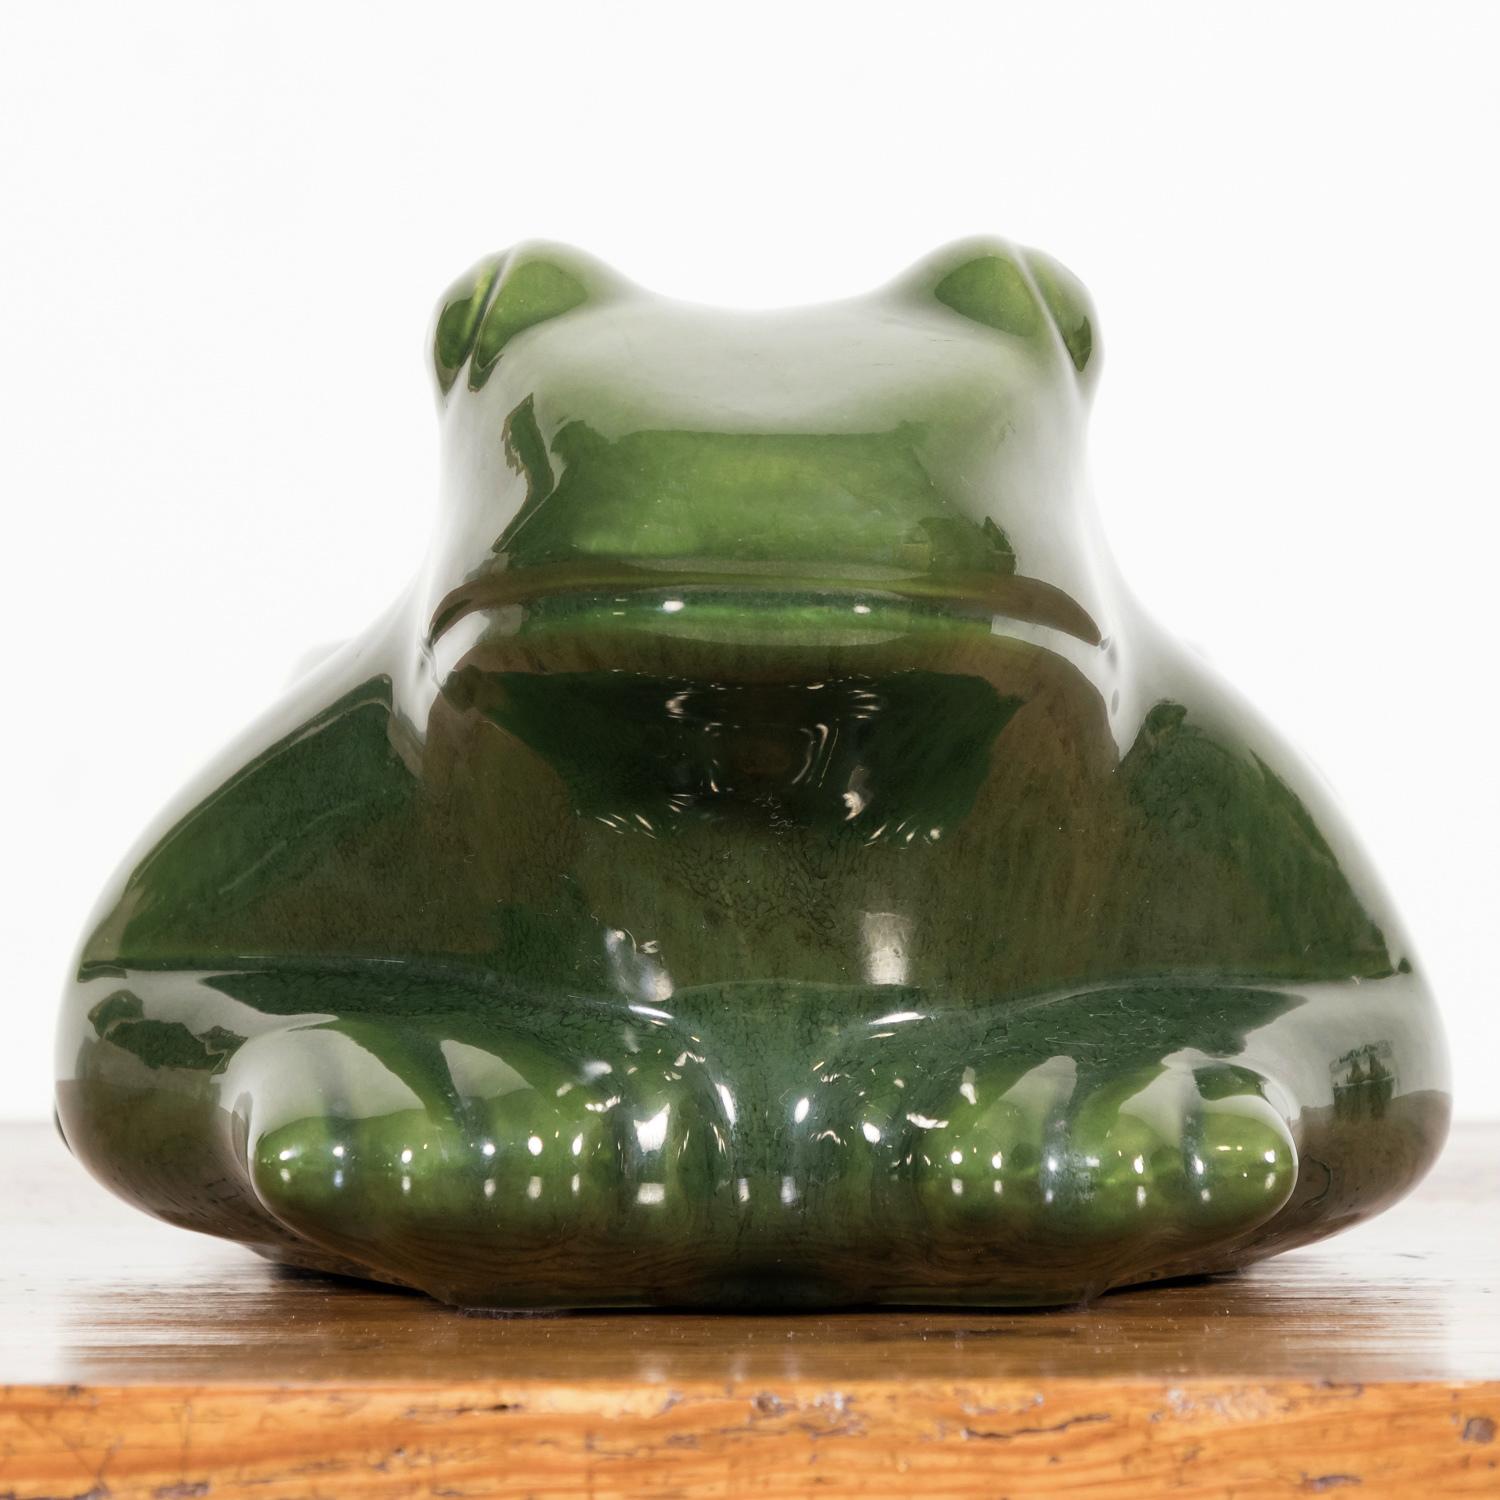 Large Vintage French L'HERITIER GUYOT DIJON Green Ceramic Frog Ad Ashtray 1